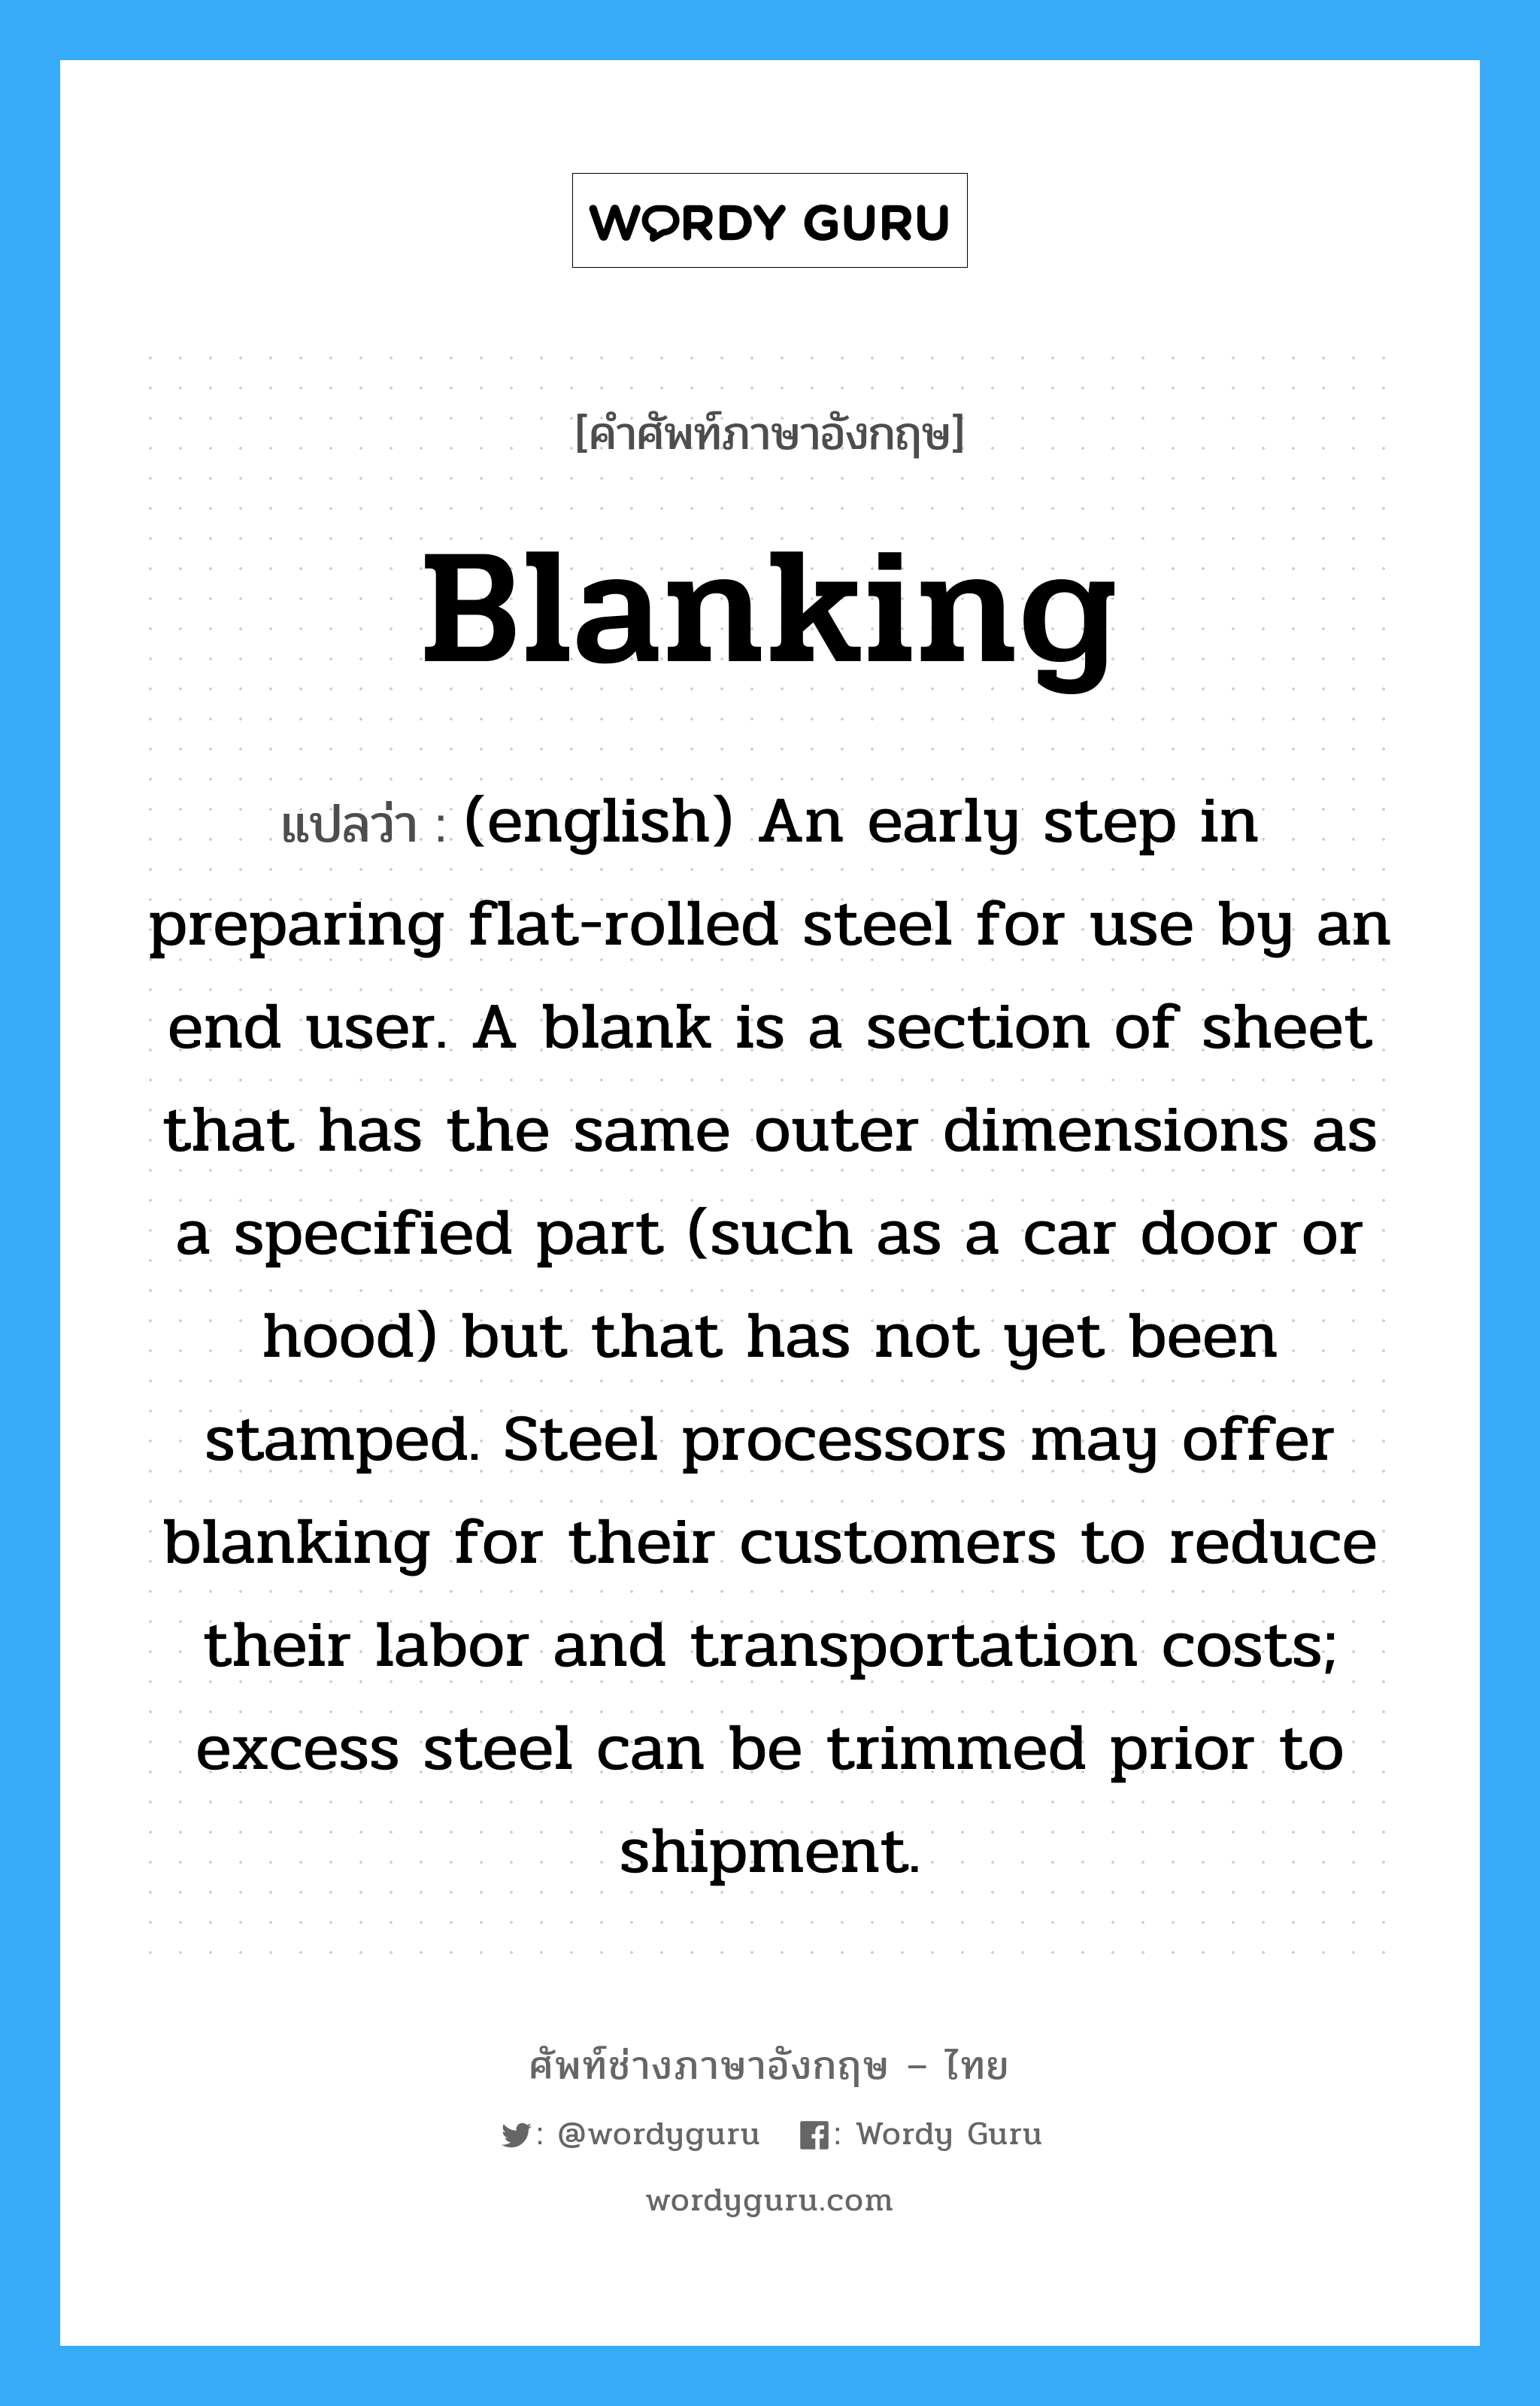 (english) An early step in preparing flat-rolled steel for use by an end user. A blank is a section of sheet that has the same outer dimensions as a specified part (such as a car door or hood) but that has not yet been stamped. Steel processors may offer blanking for their customers to reduce their labor and transportation costs; excess steel can be trimmed prior to shipment. ภาษาอังกฤษ?, คำศัพท์ช่างภาษาอังกฤษ - ไทย (english) An early step in preparing flat-rolled steel for use by an end user. A blank is a section of sheet that has the same outer dimensions as a specified part (such as a car door or hood) but that has not yet been stamped. Steel processors may offer blanking for their customers to reduce their labor and transportation costs; excess steel can be trimmed prior to shipment. คำศัพท์ภาษาอังกฤษ (english) An early step in preparing flat-rolled steel for use by an end user. A blank is a section of sheet that has the same outer dimensions as a specified part (such as a car door or hood) but that has not yet been stamped. Steel processors may offer blanking for their customers to reduce their labor and transportation costs; excess steel can be trimmed prior to shipment. แปลว่า Blanking